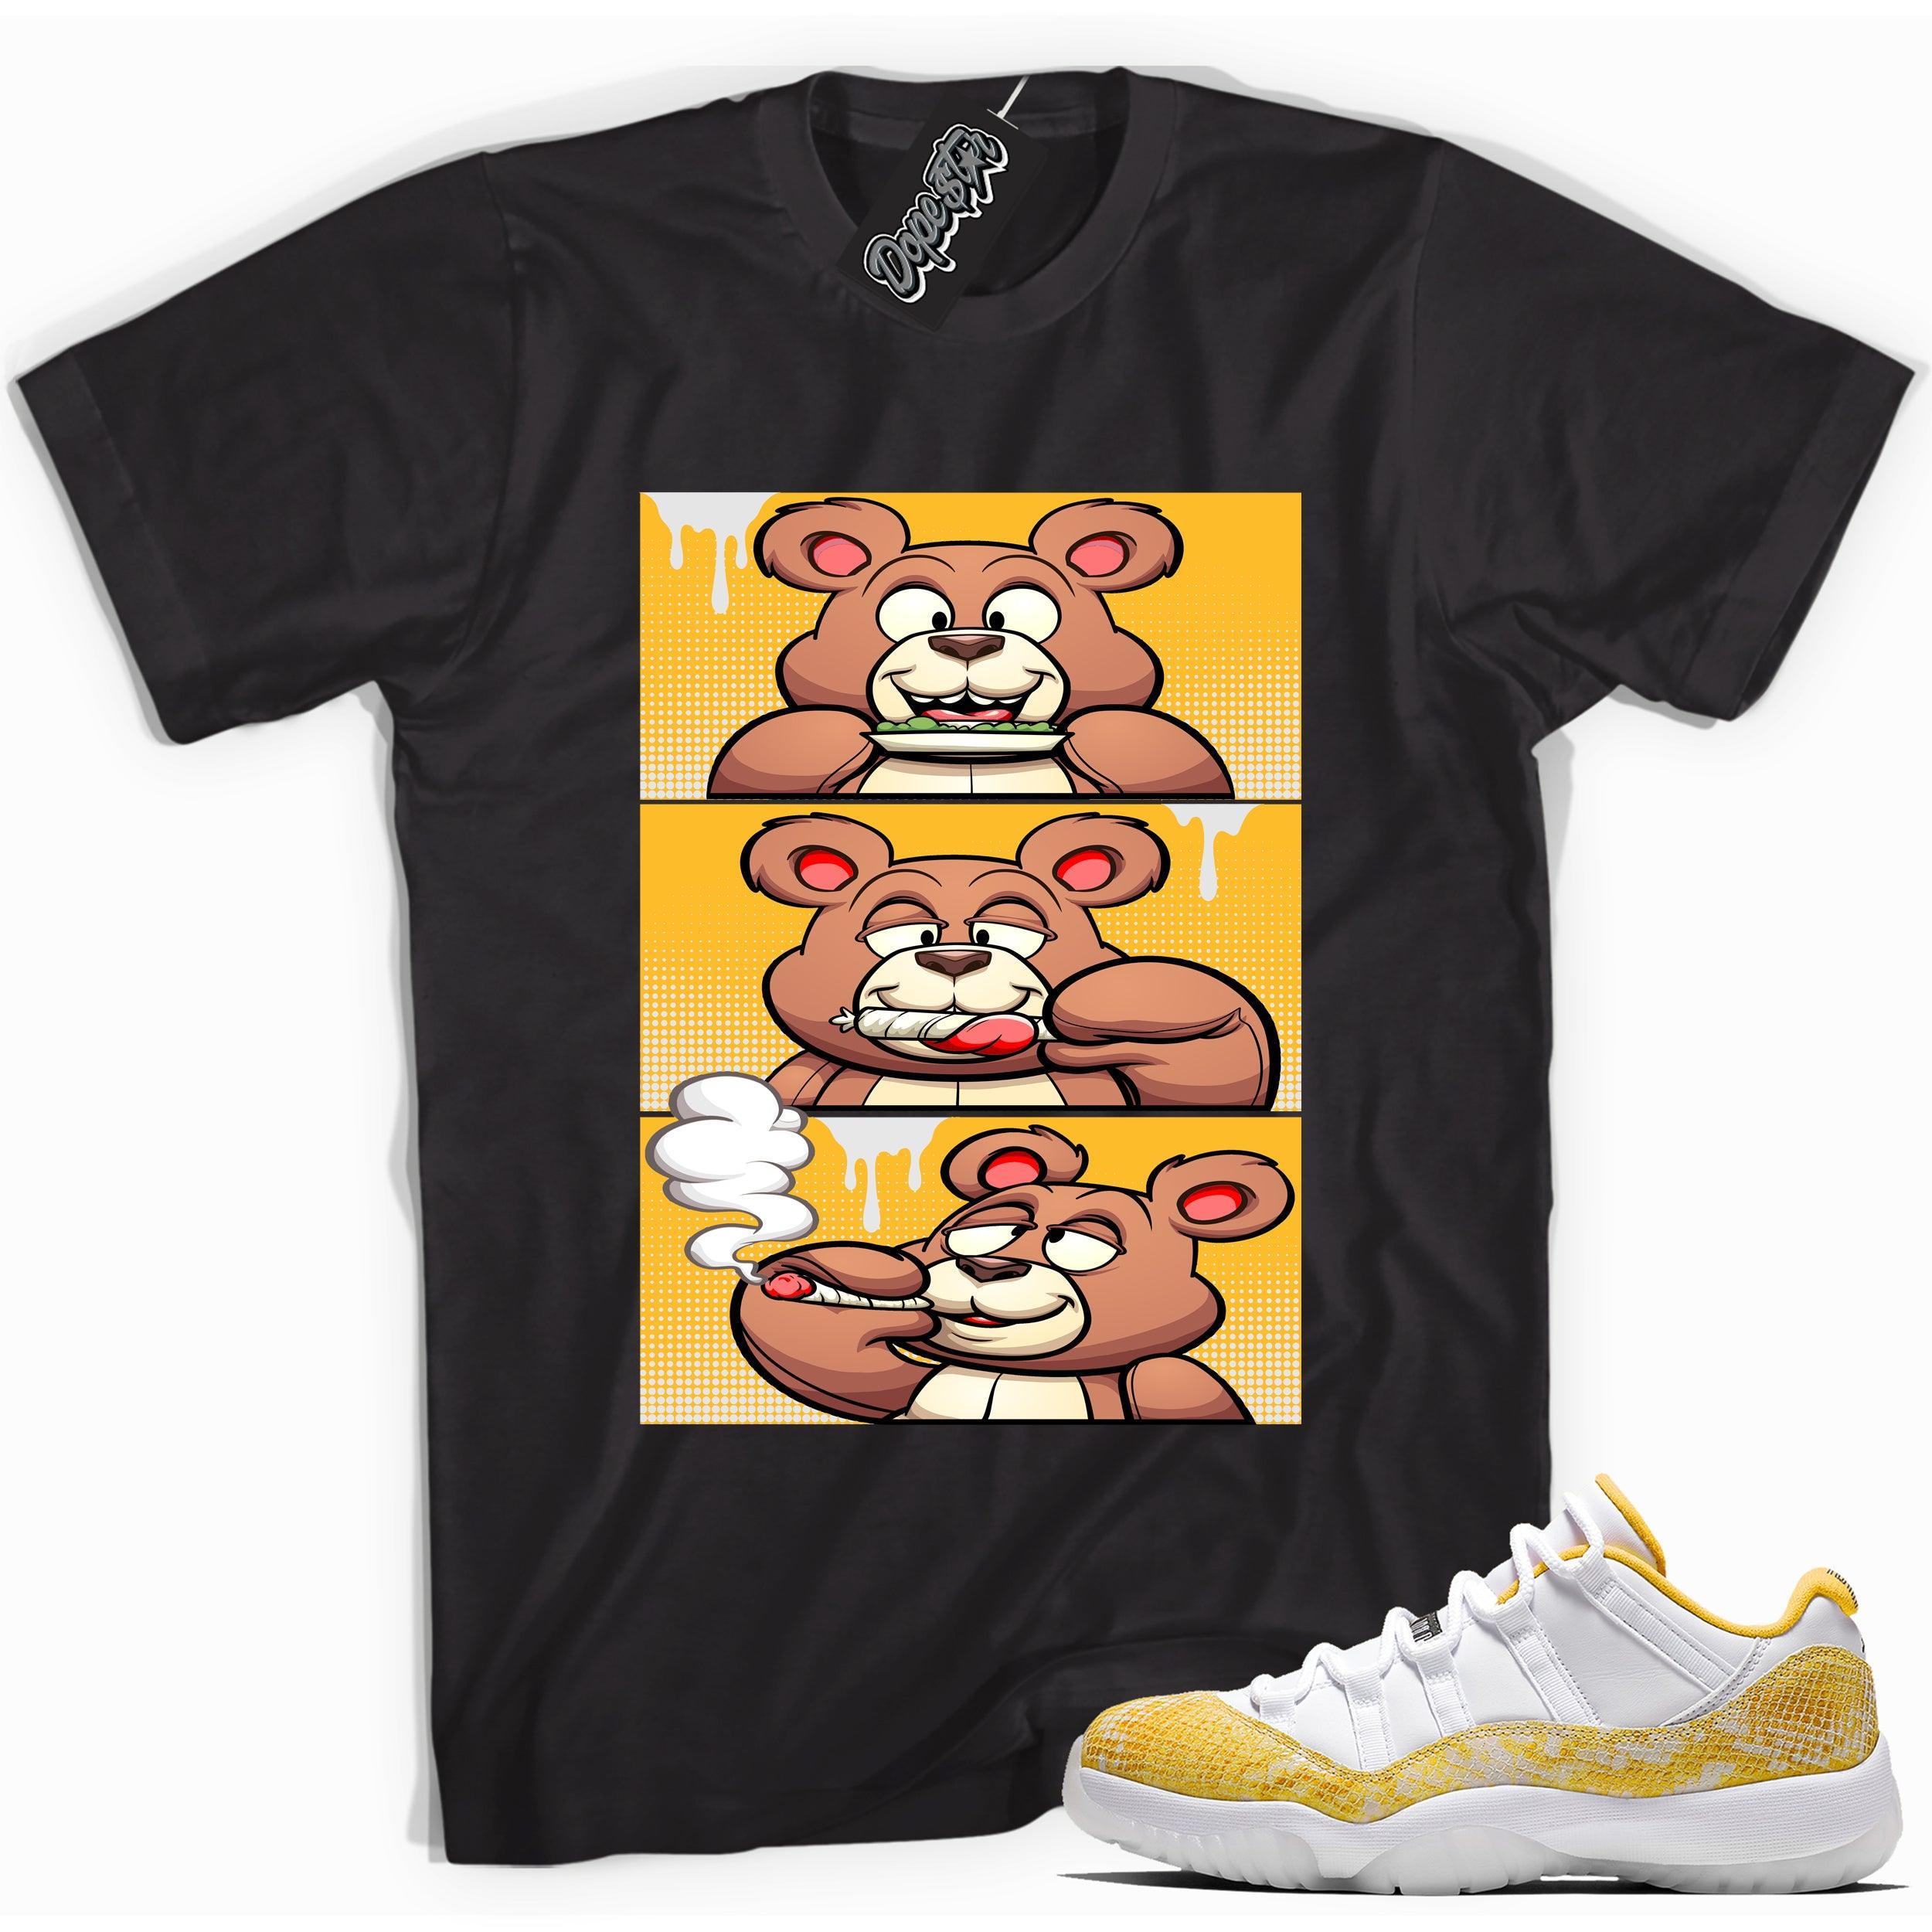 Cool black graphic tee with 'roll it lick it smoke it bear' print, that perfectly matches  Air Jordan 11 Retro Low Yellow Snakeskin sneakers